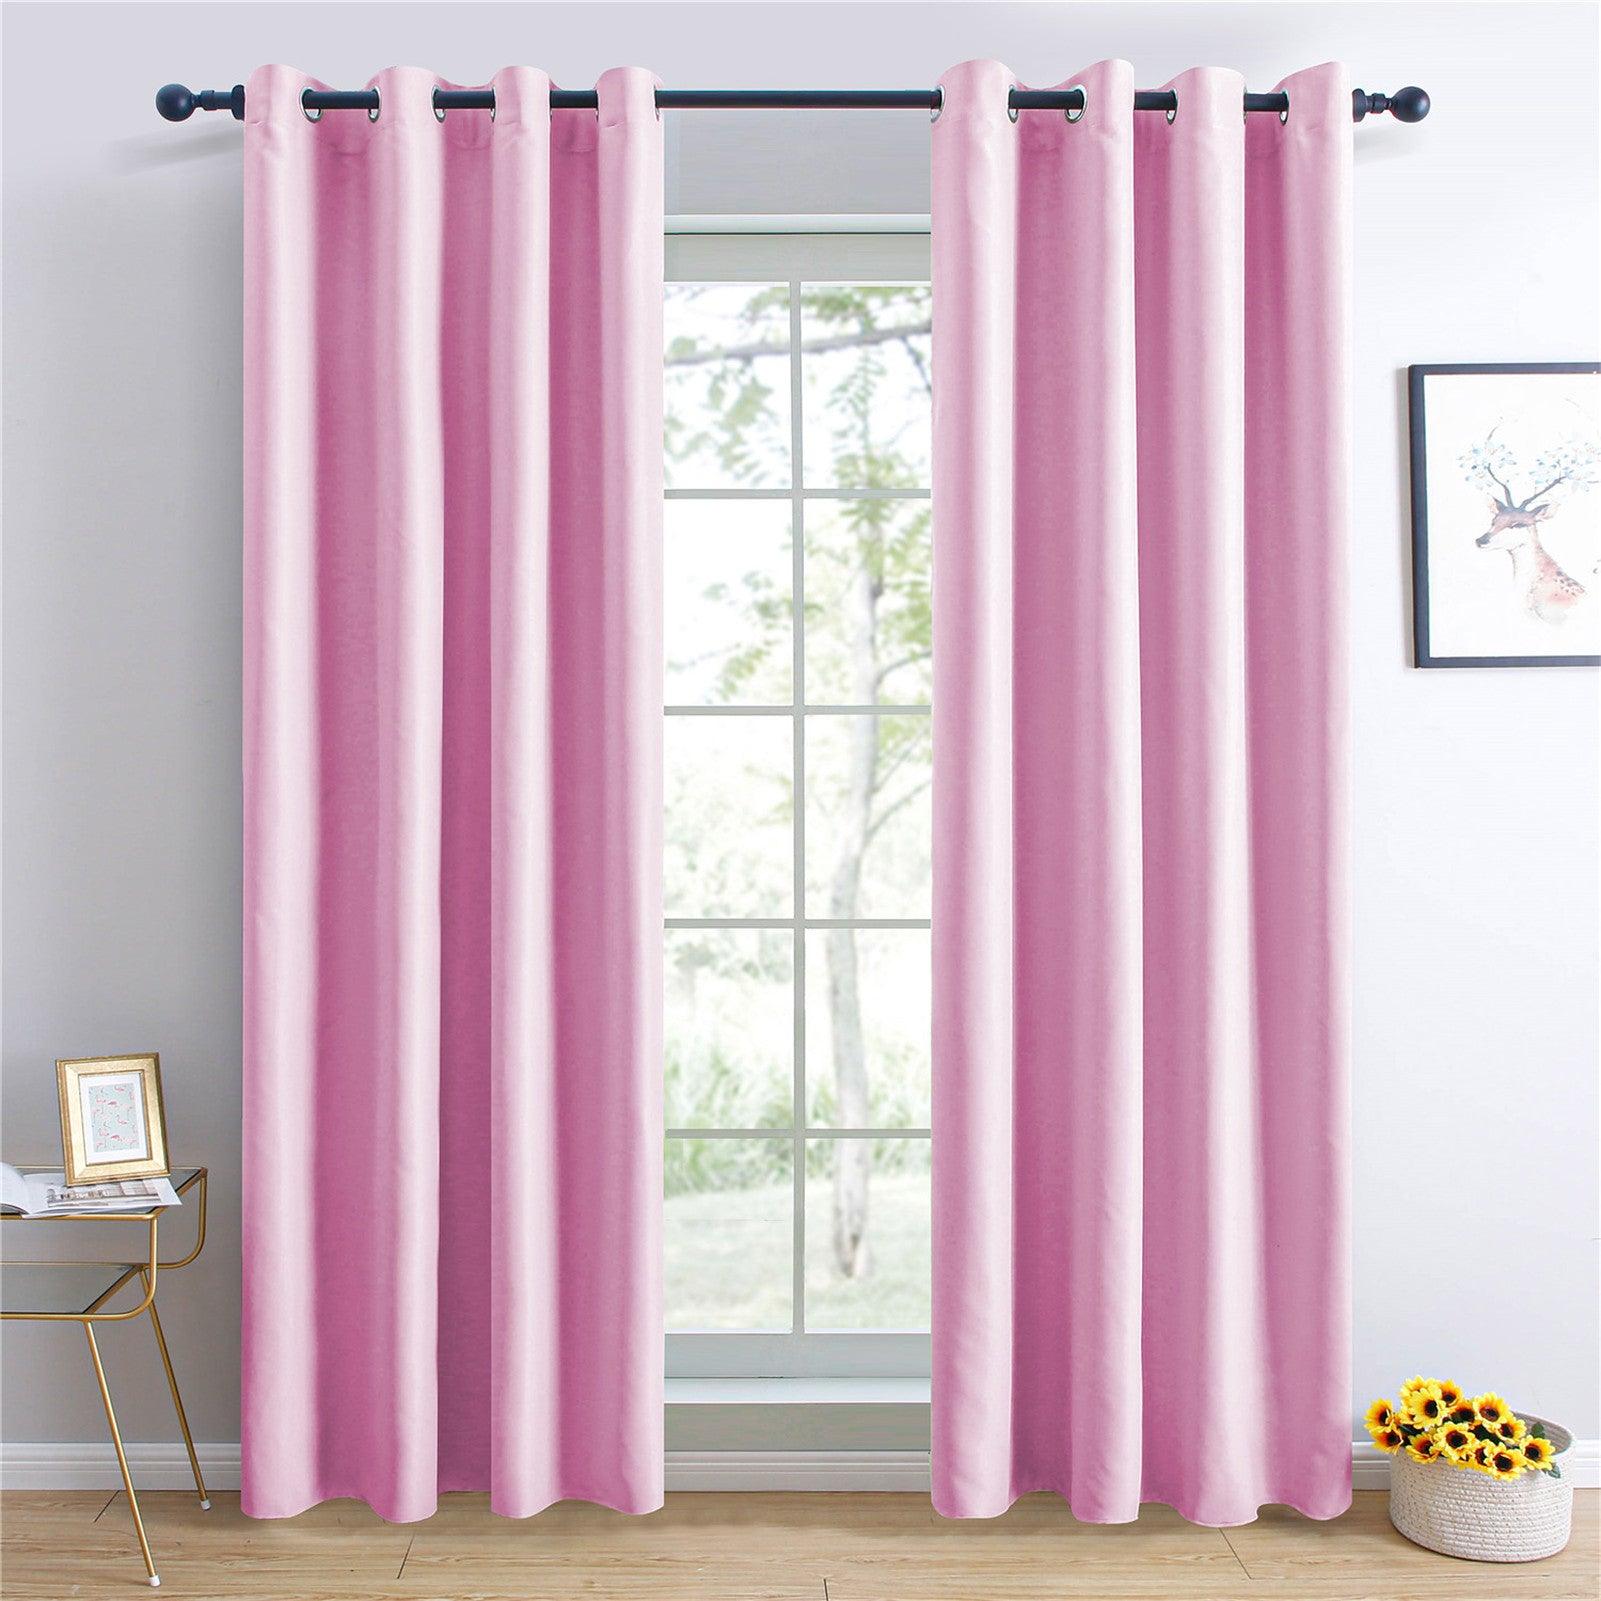 Diy Room Divider Curtains -Aburto Solid Color Blackout Thermal Curtains Suit Insomniac For Bedroom,1 Panel - Topfinel